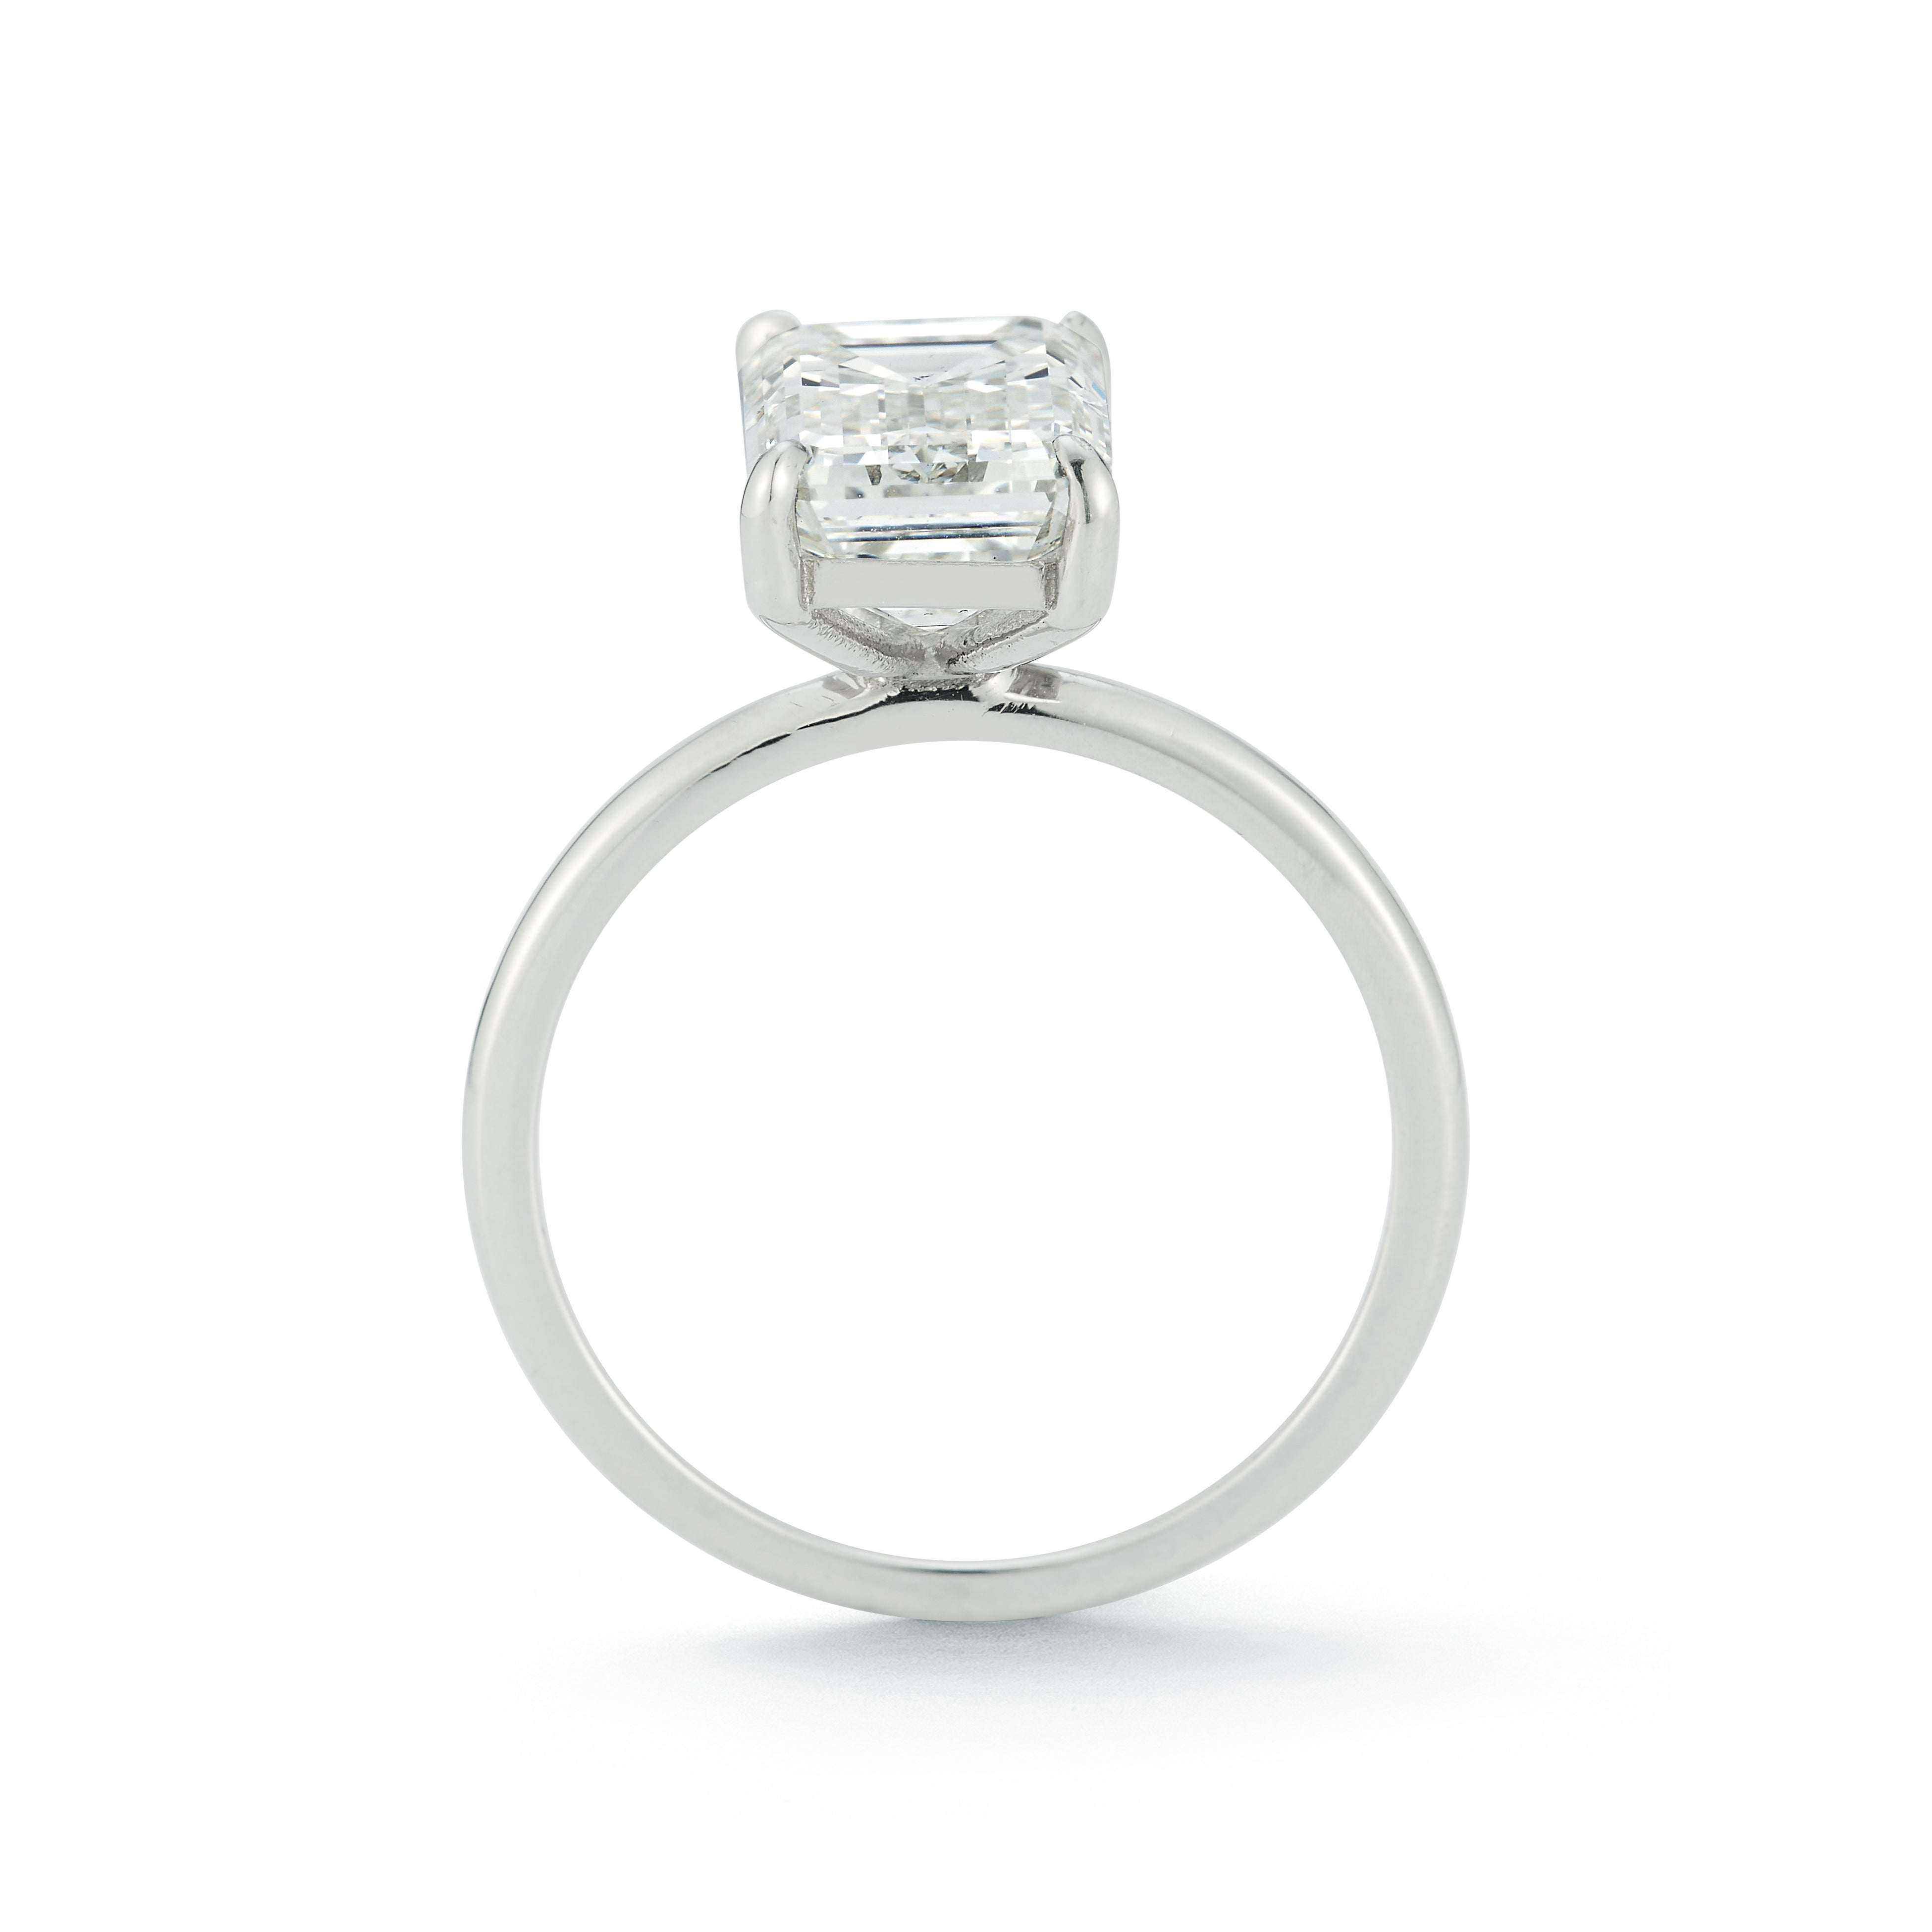 Jamie Engagement Ring with emerald cut center diamond and platinum band